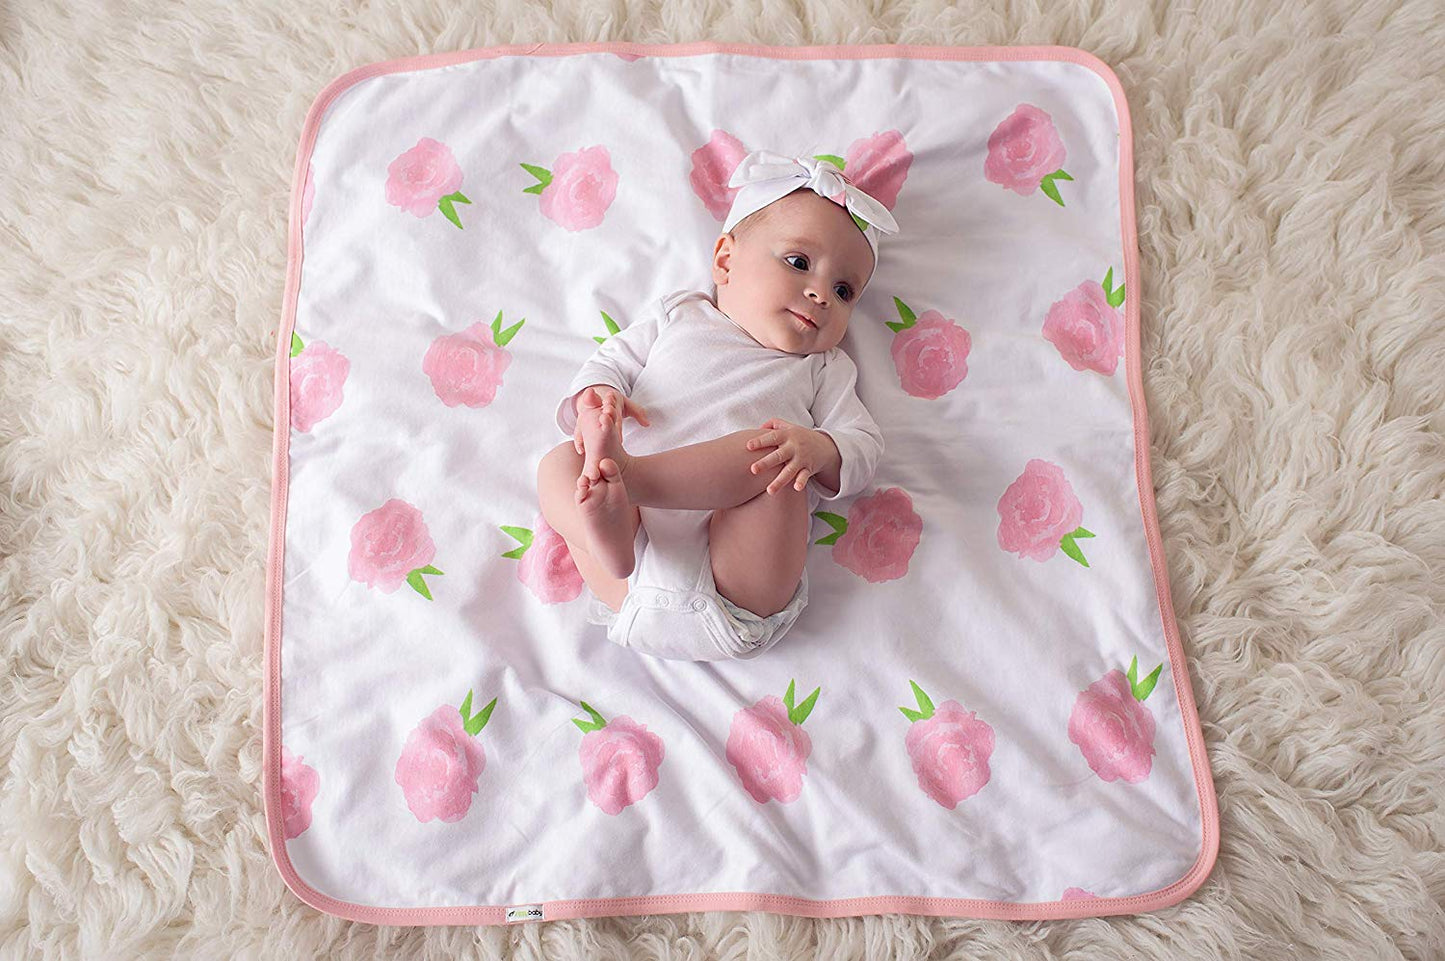 Peony & Heart 5 Piece Blanket, Hat and Headband Collection Pink White